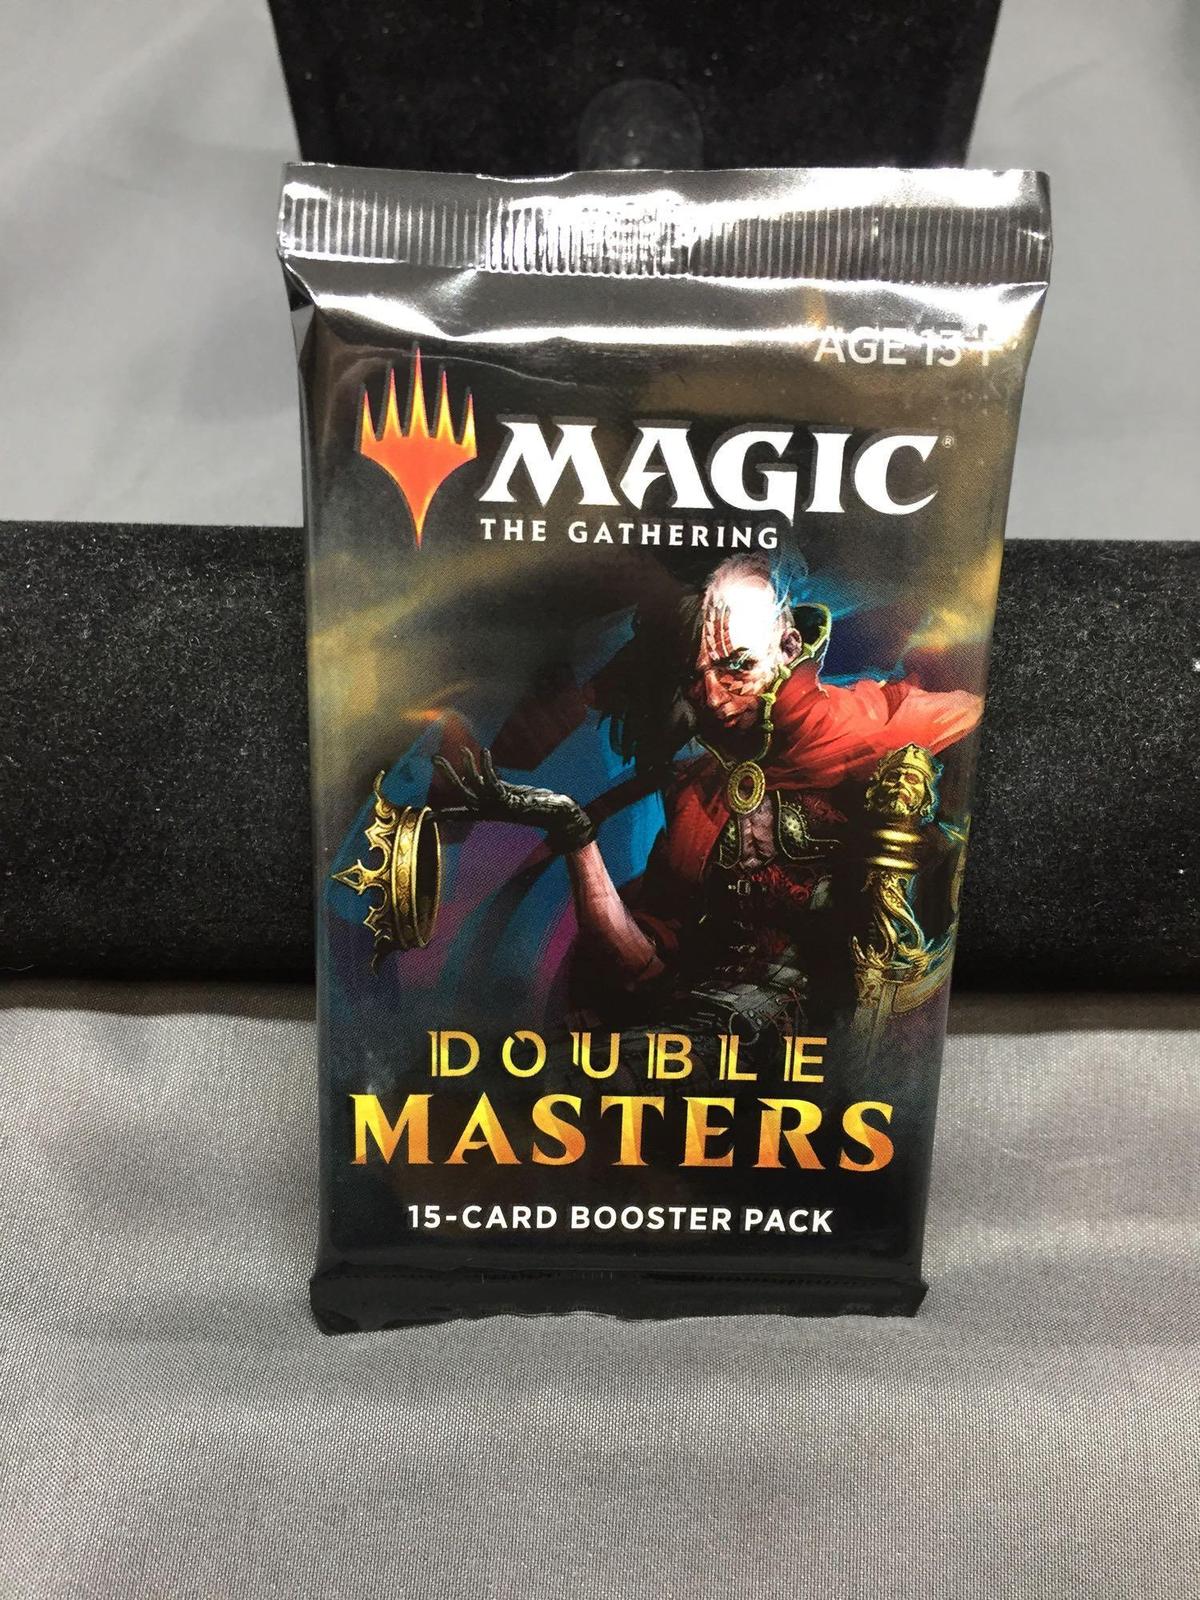 Factory Sealed Magic the Gathering DOUBLE MASTERS 15 Card Booster Pack - FOIL FORCE OF WILL?